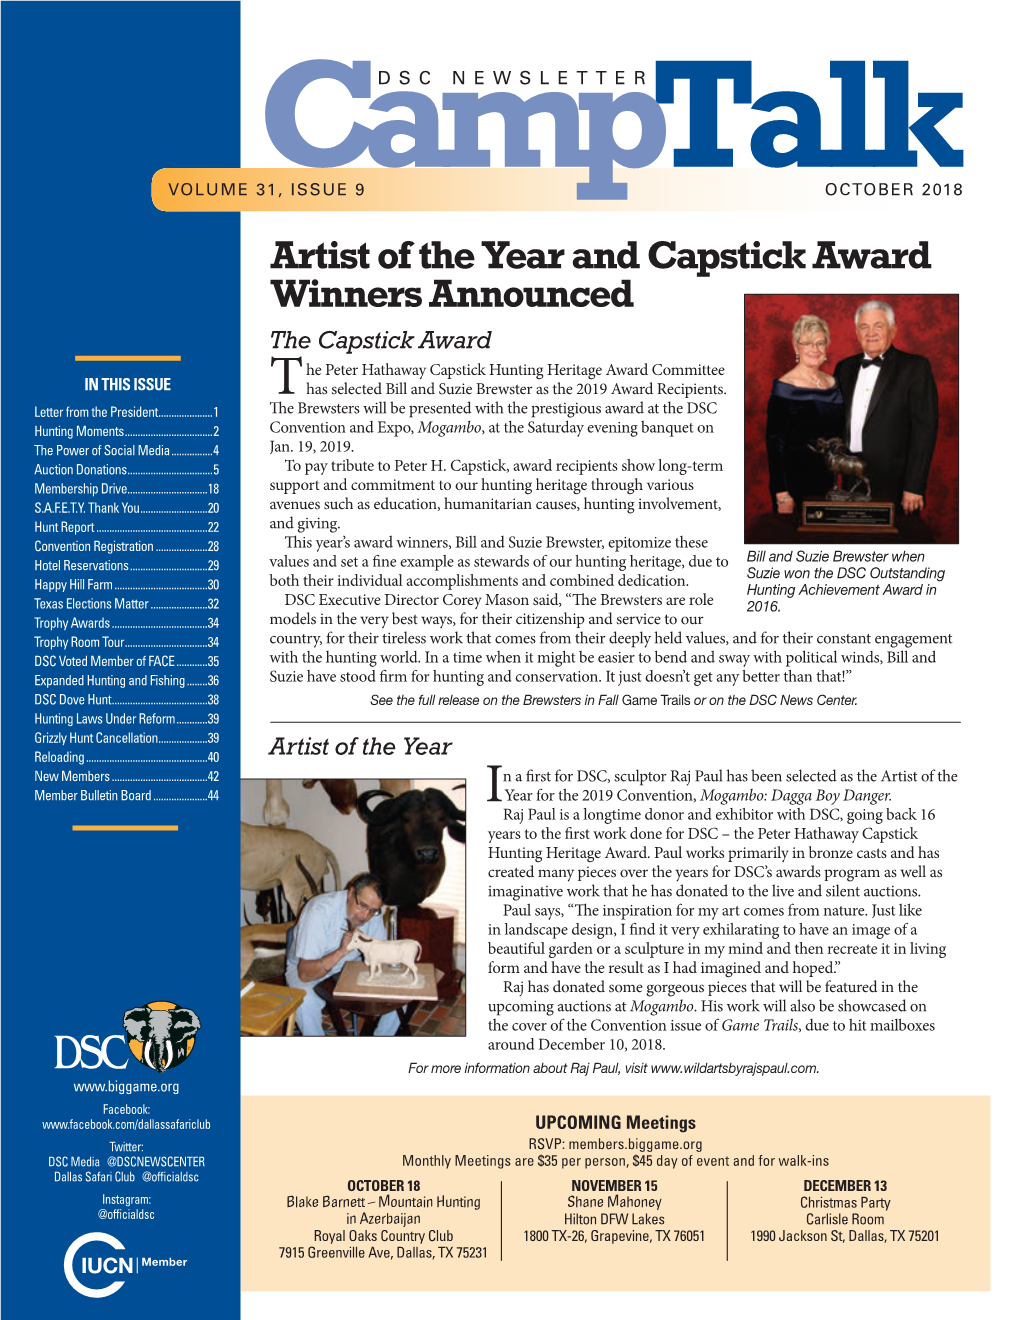 Artist of the Year and Capstick Award Winners